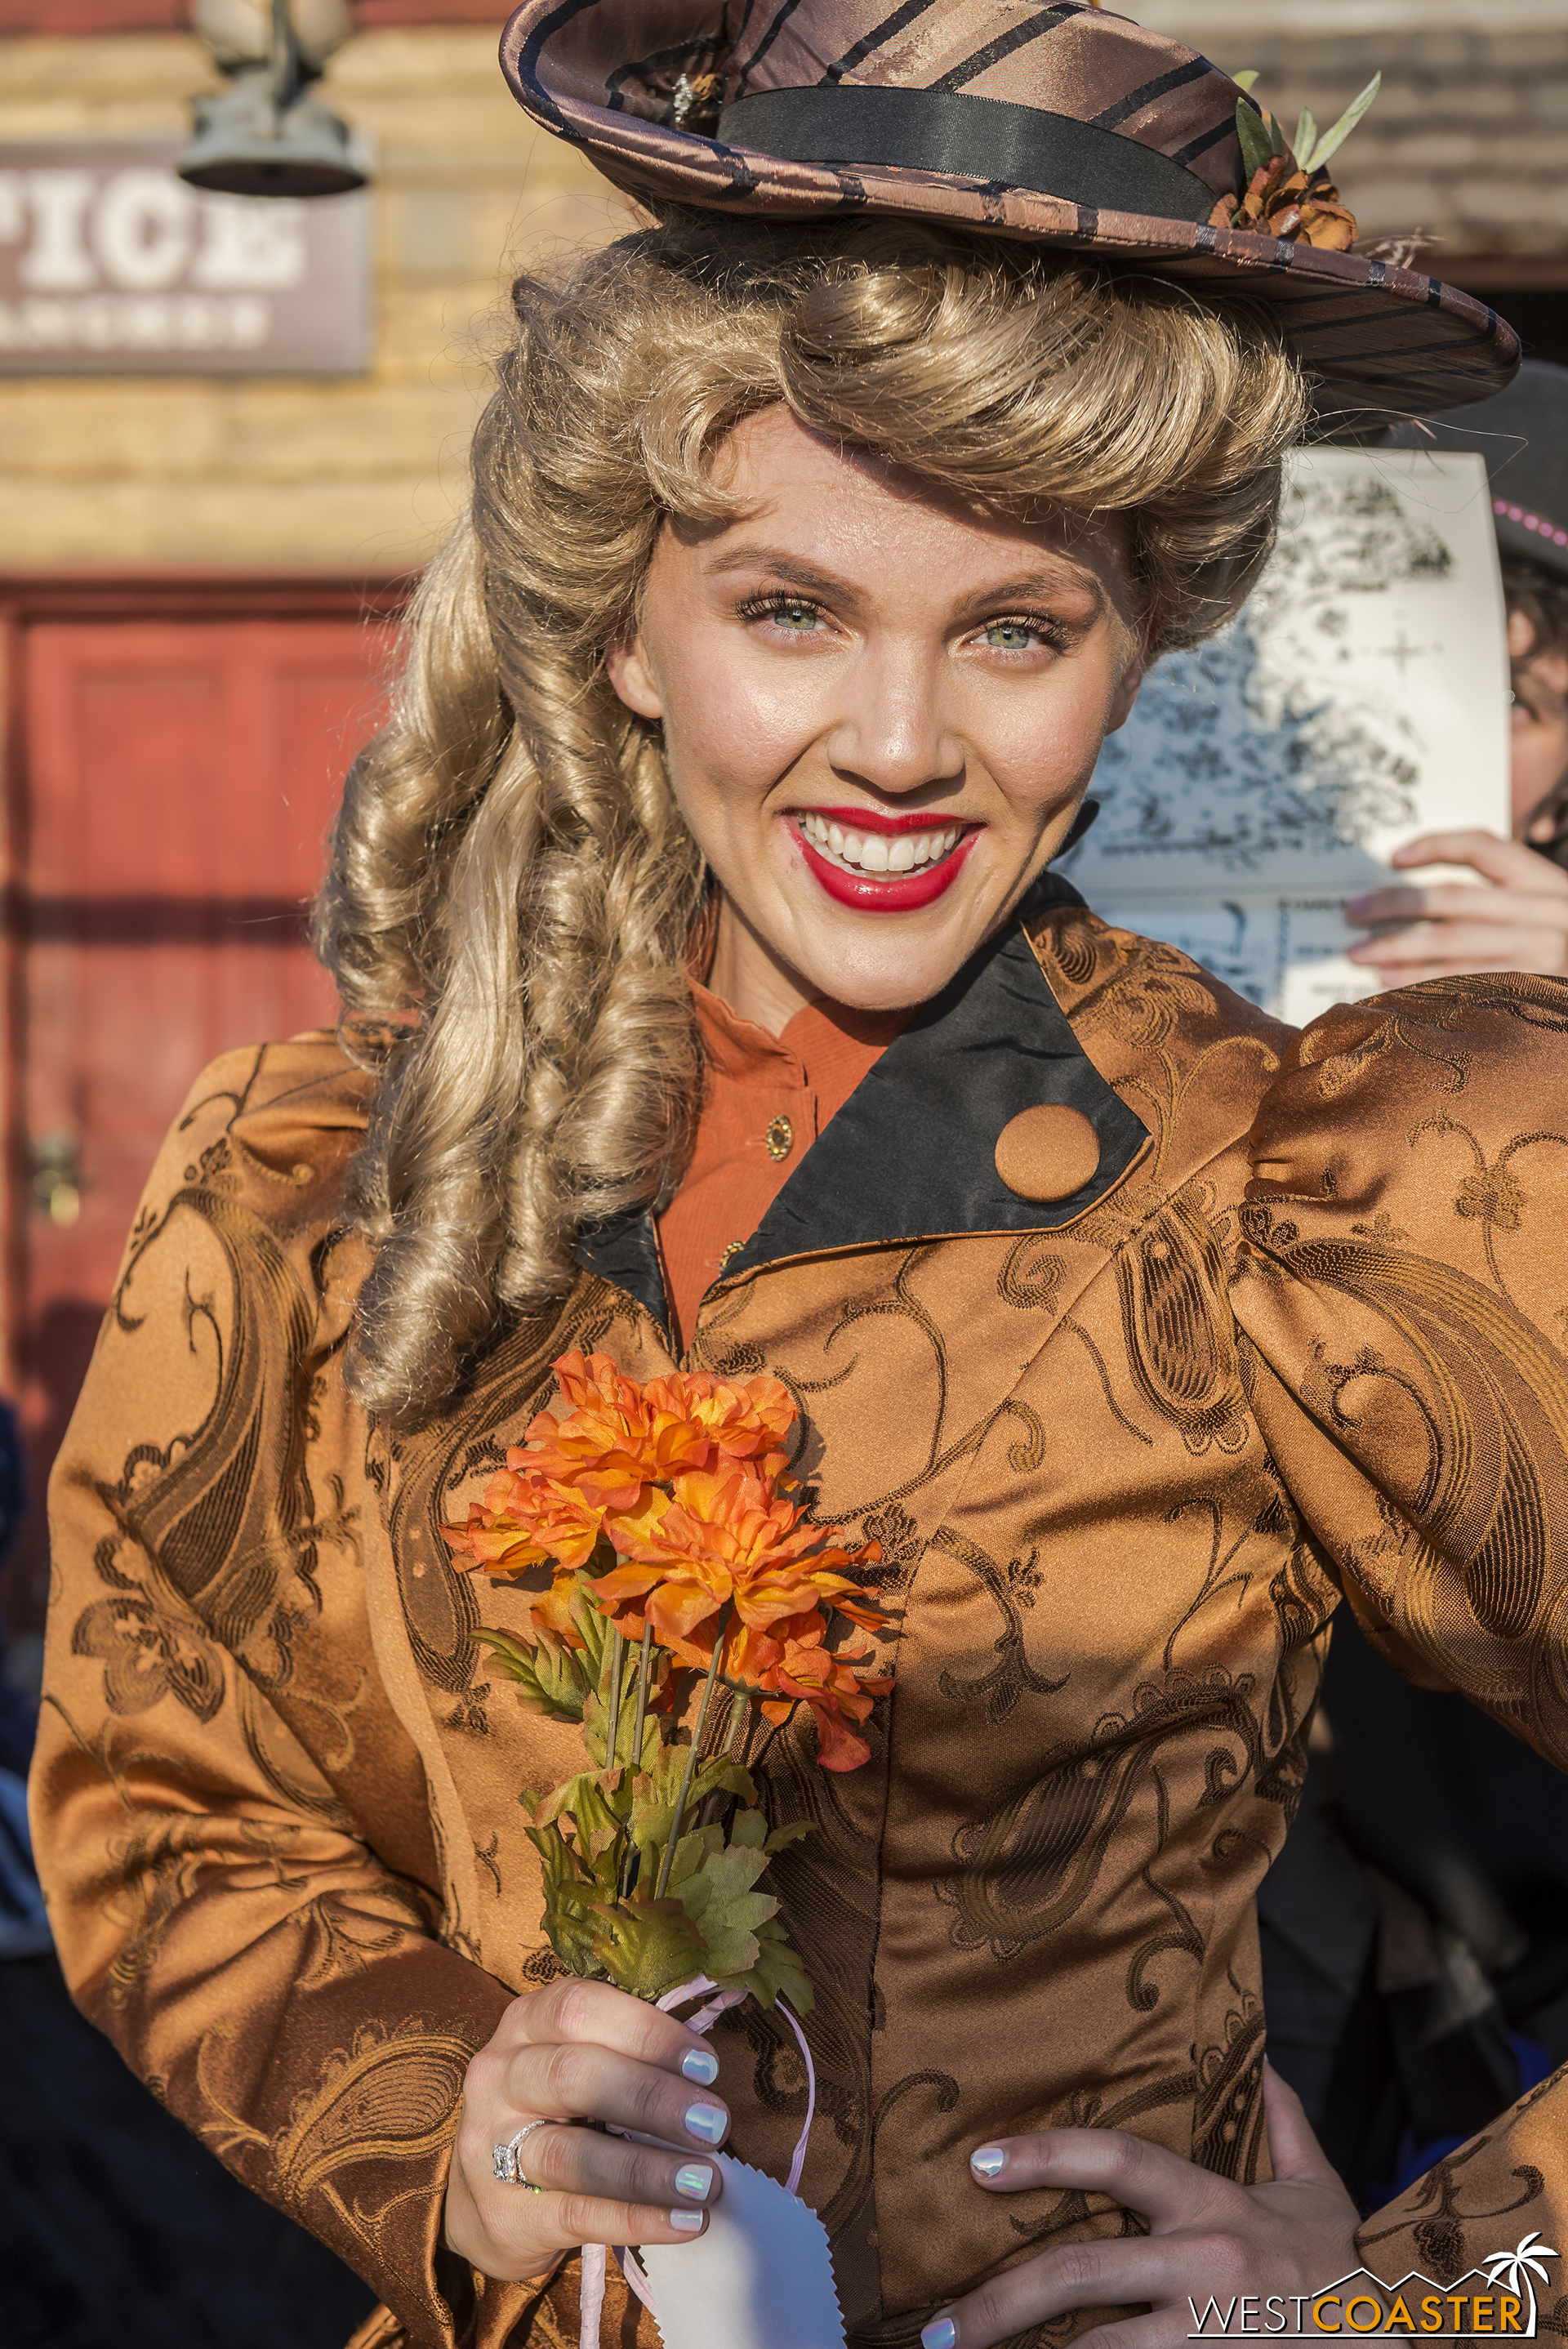  Calico Saloon owner, Goldie West, makes a special return to Calico just in time for the Founder’s Day Hoedown. 